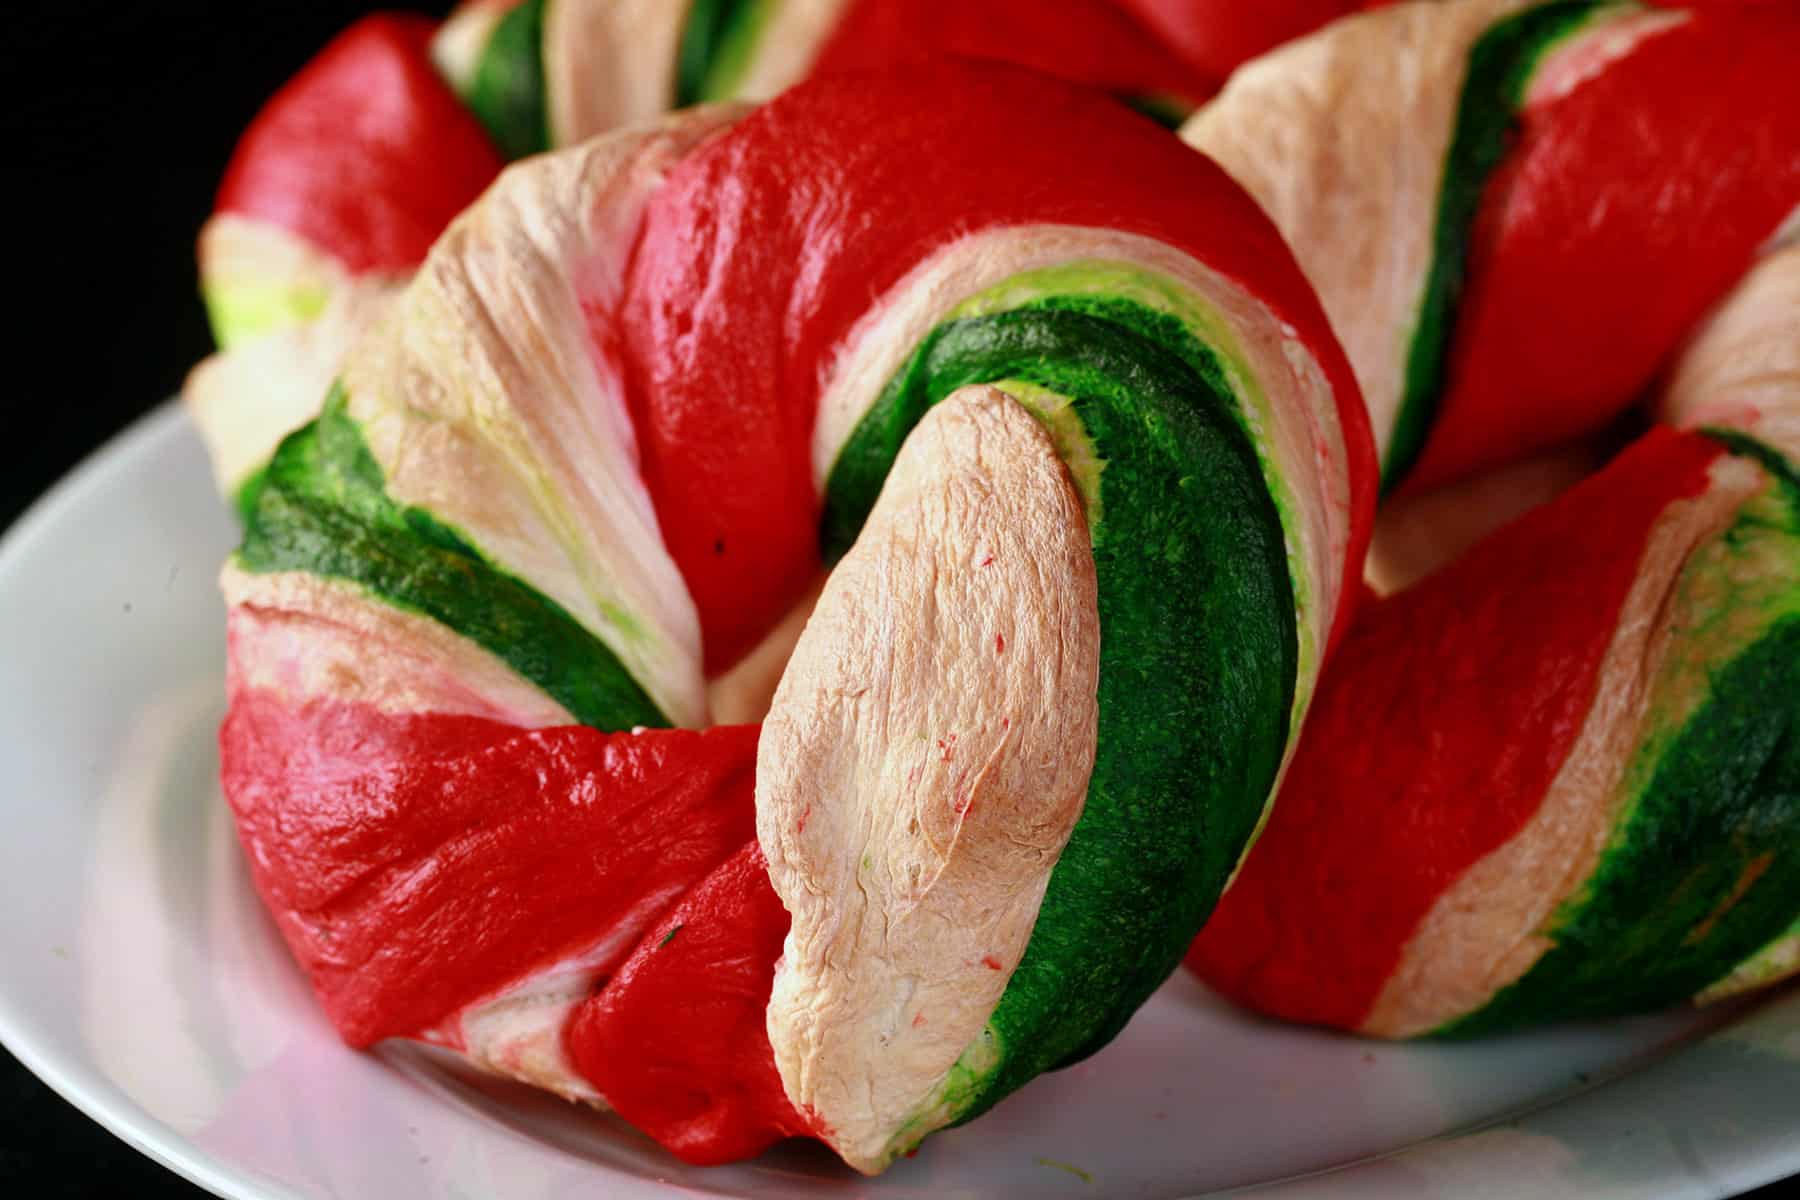 Several red, white, and green Candy cane bagels on a plate.